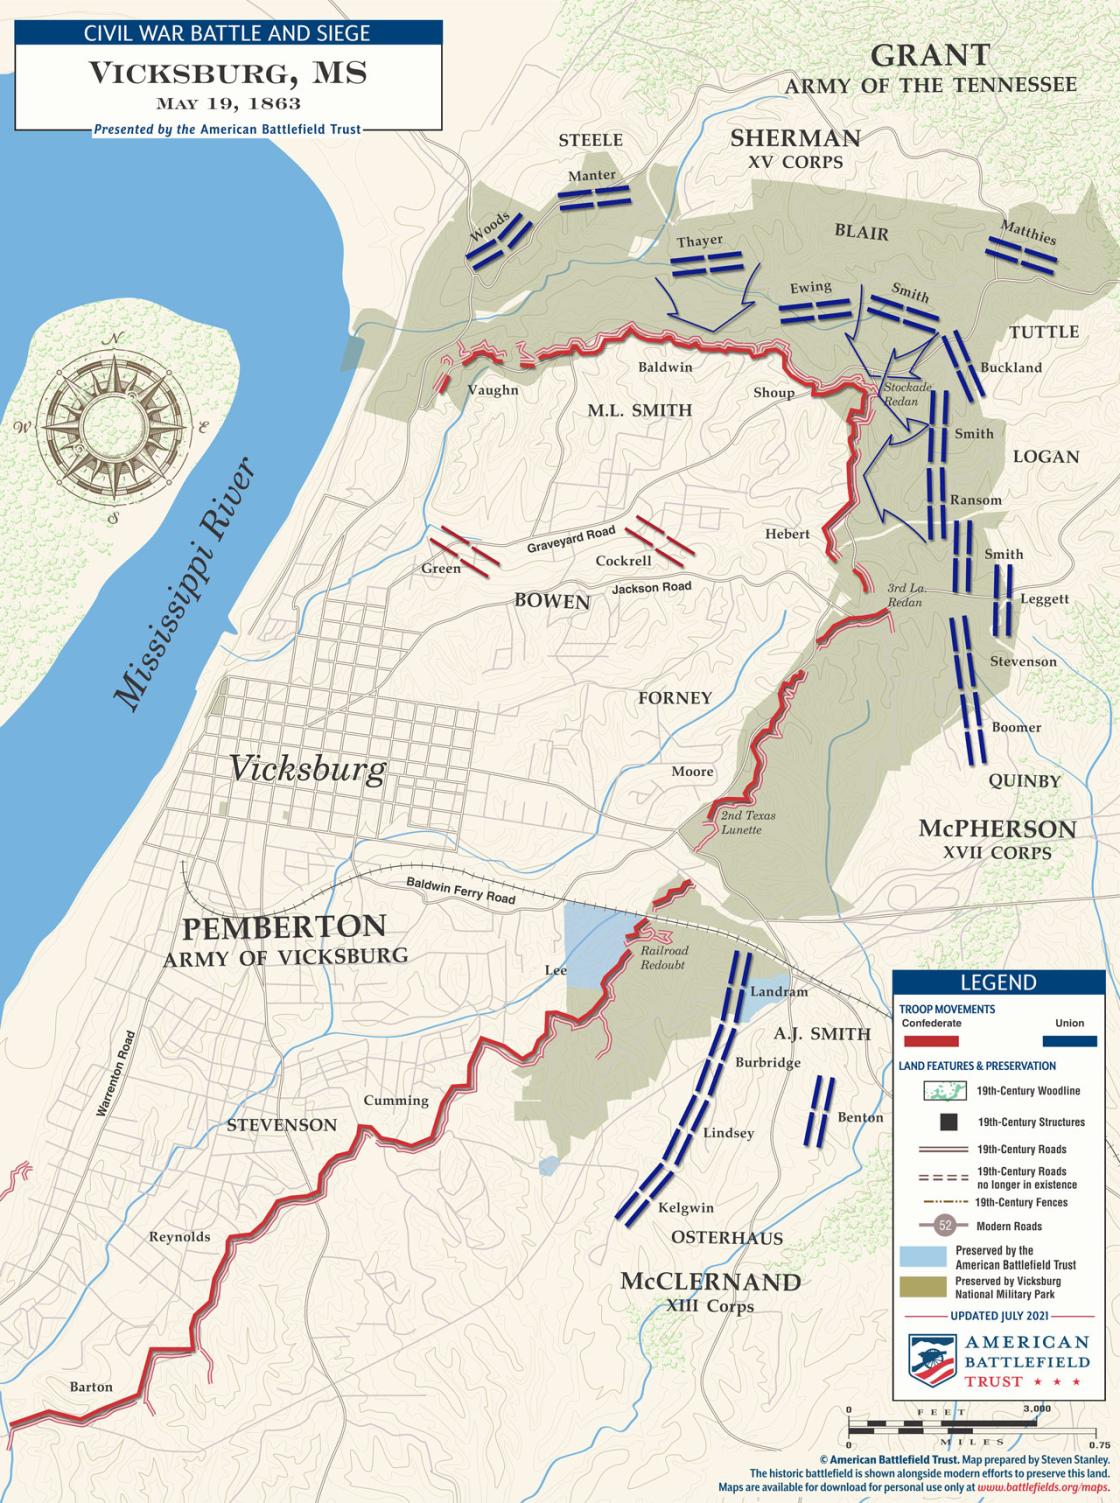 Battle map of the Siege of Vicksburg on May 19, 1863